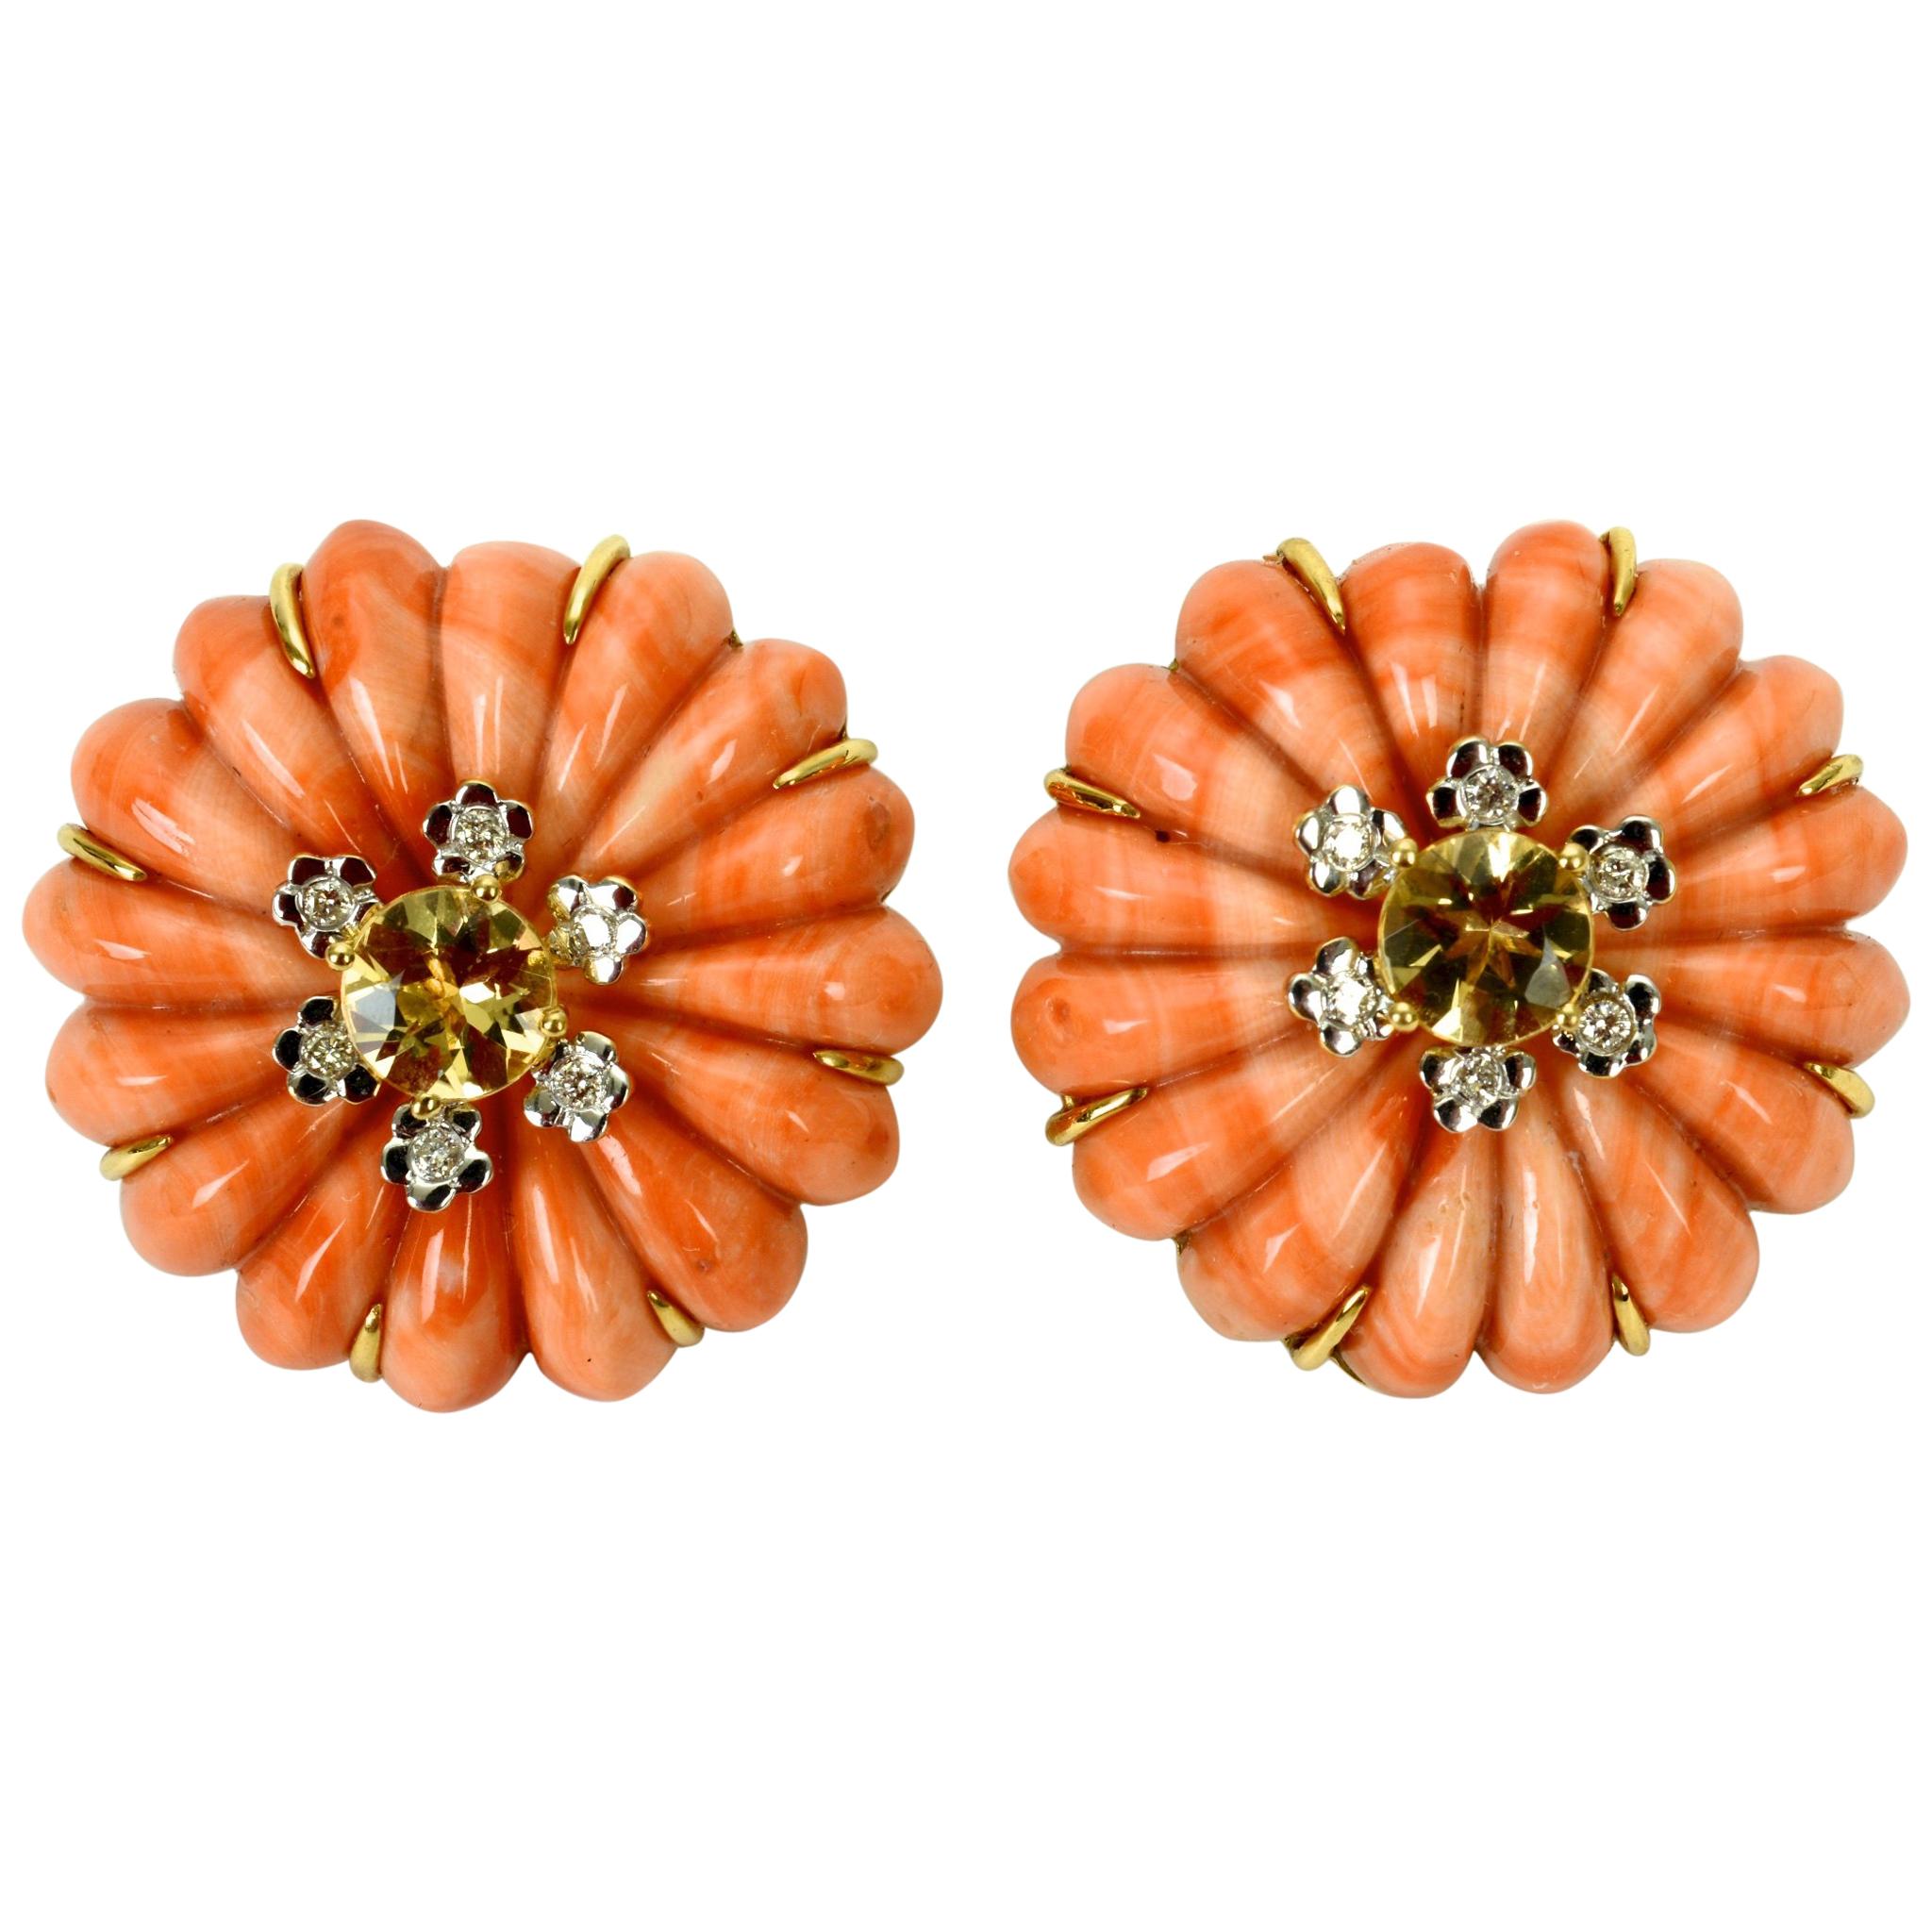 Pair of Carved Coral, Diamond and Citrine Earrings Set in 18 Karat Gold